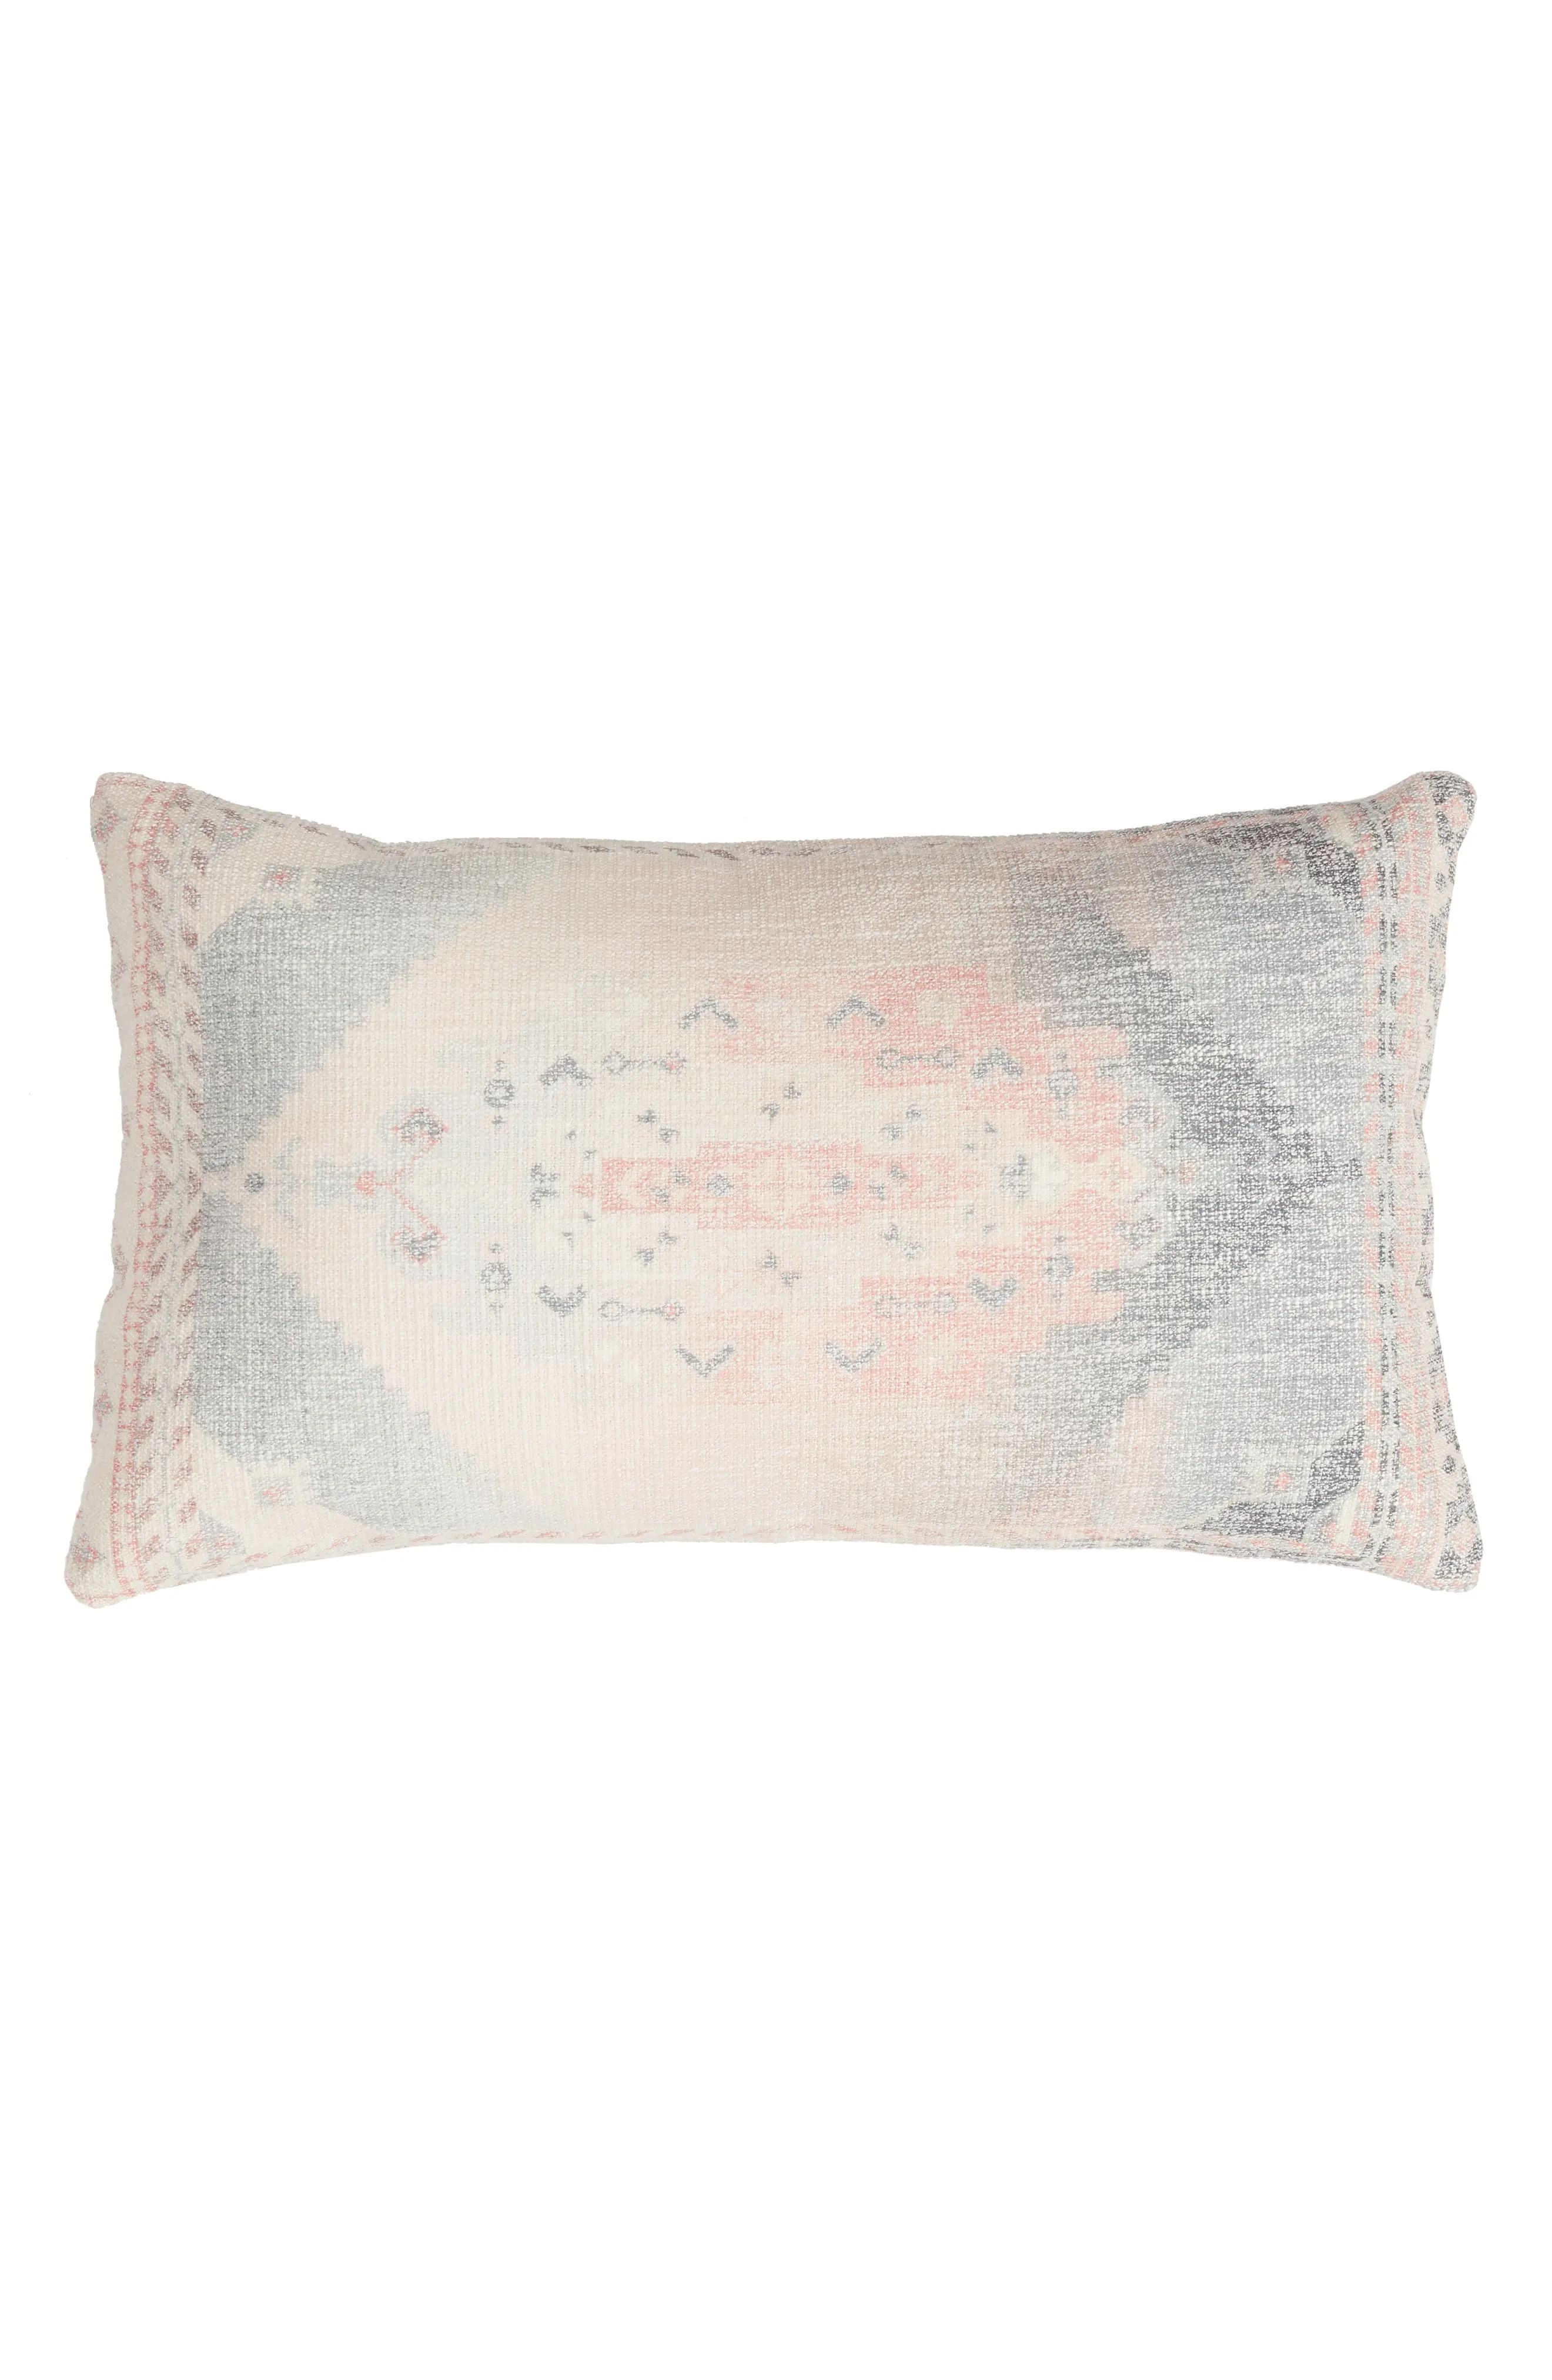 Nordstrom At Home Kilim Shine Accent Pillow | Nordstrom